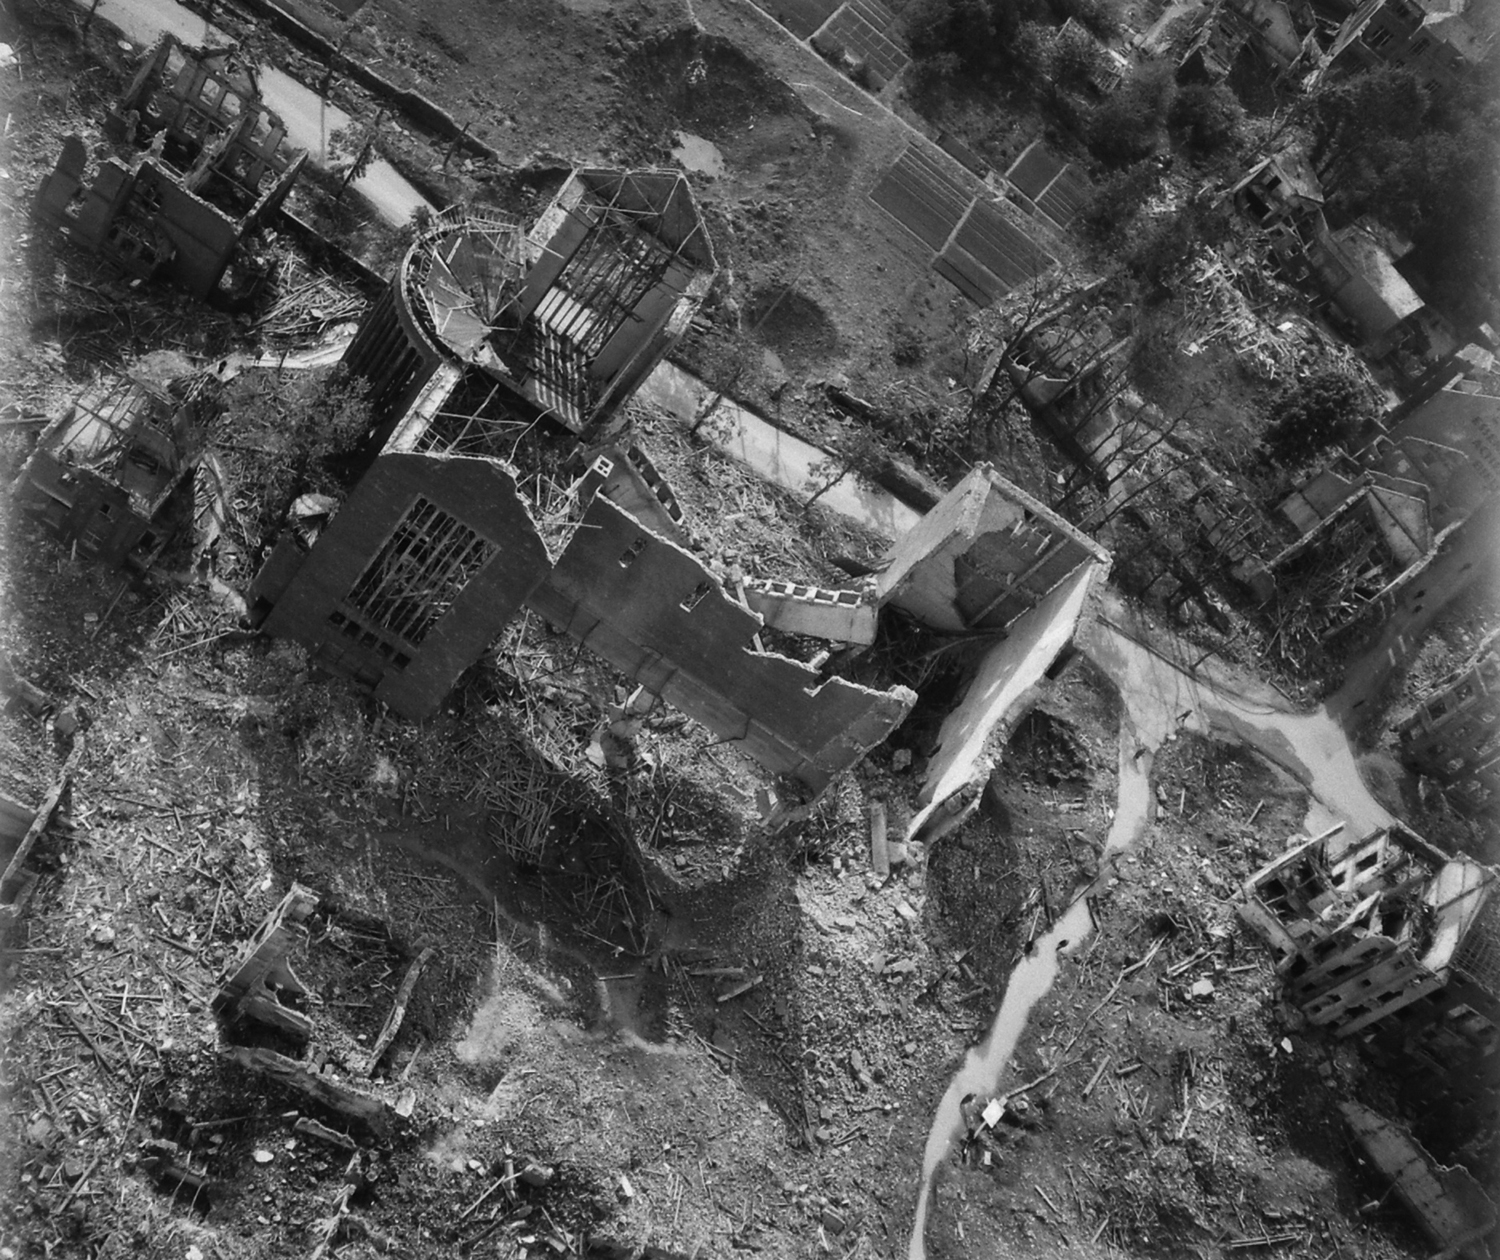 Destruction by Allied air attacks, Germany, 1945.